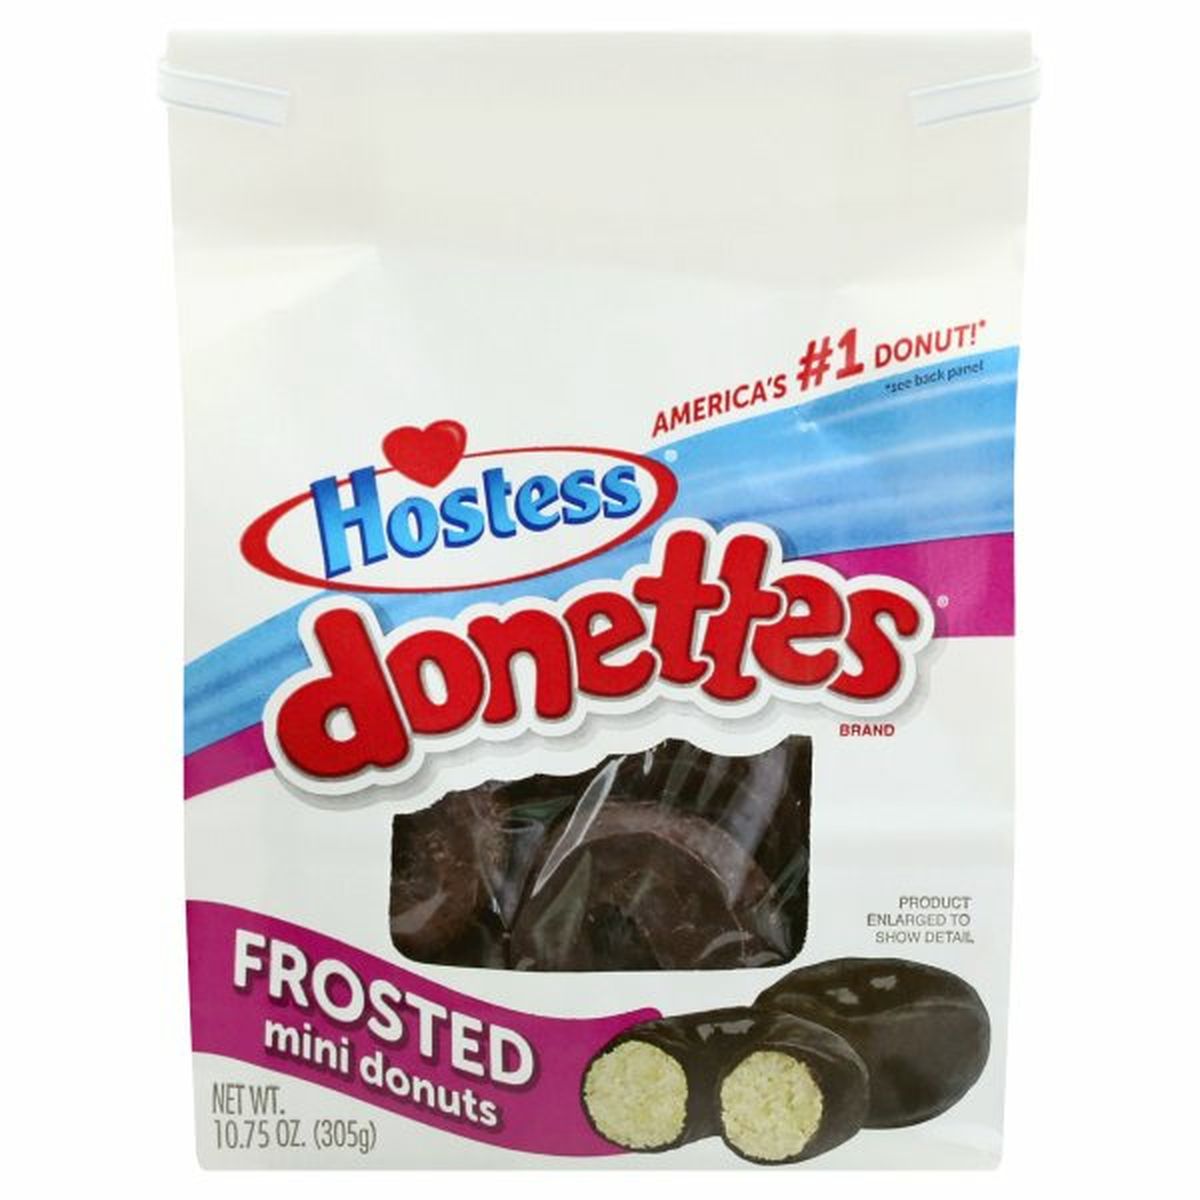 Calories in Hostess Donettes Donuts, Frosted, Mini